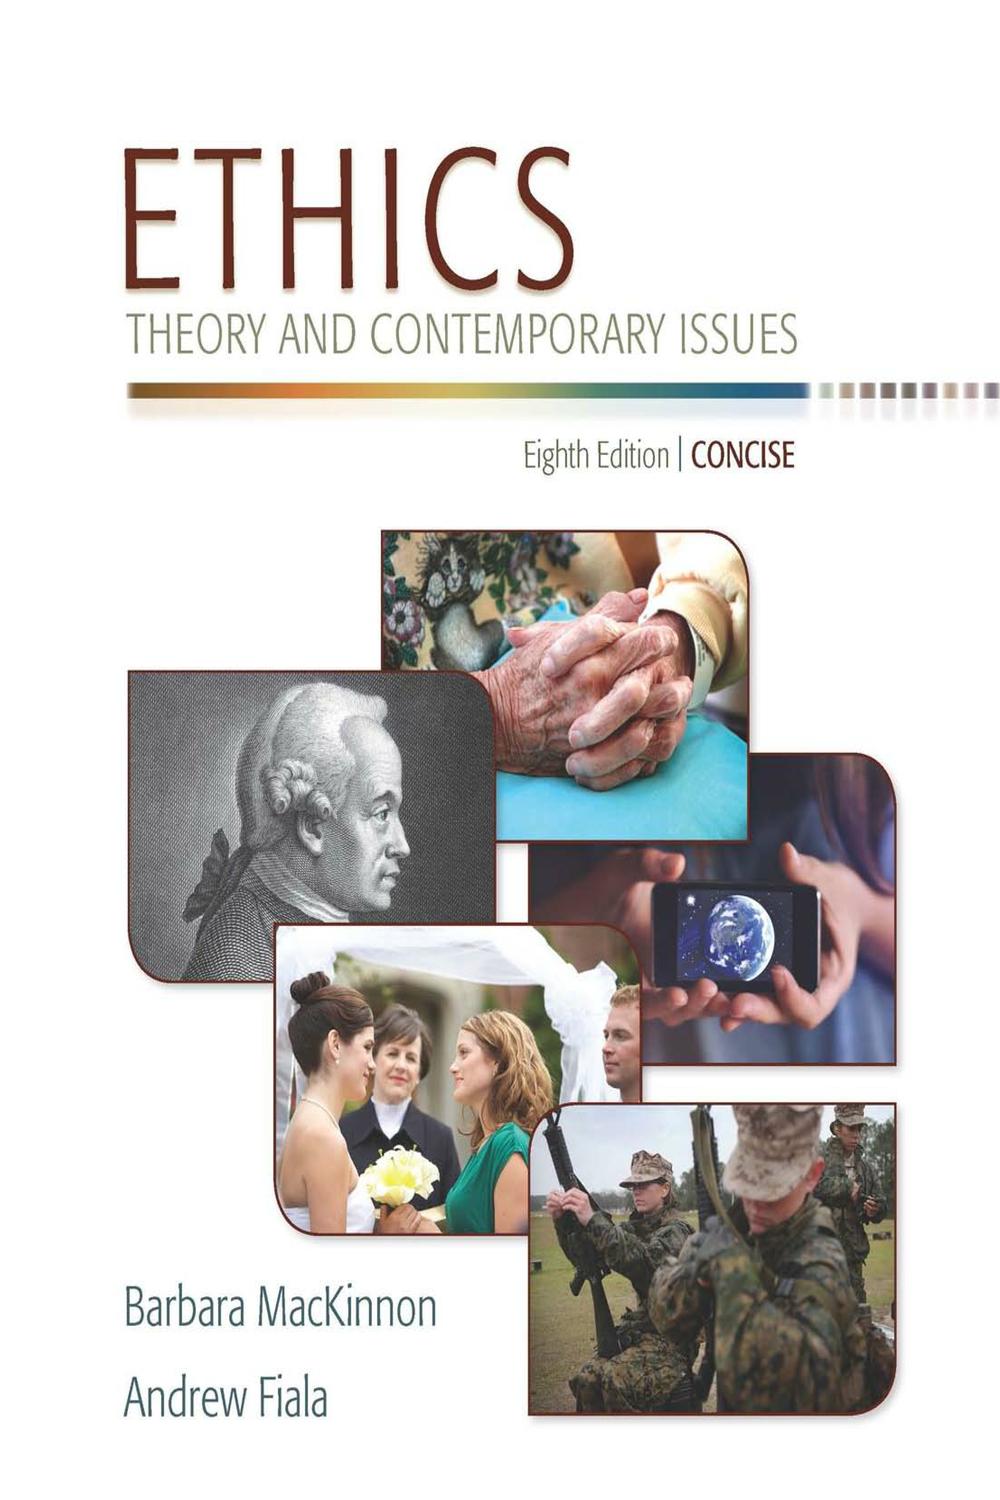 ethics theory and contemporary issues 9th edition pdf download free